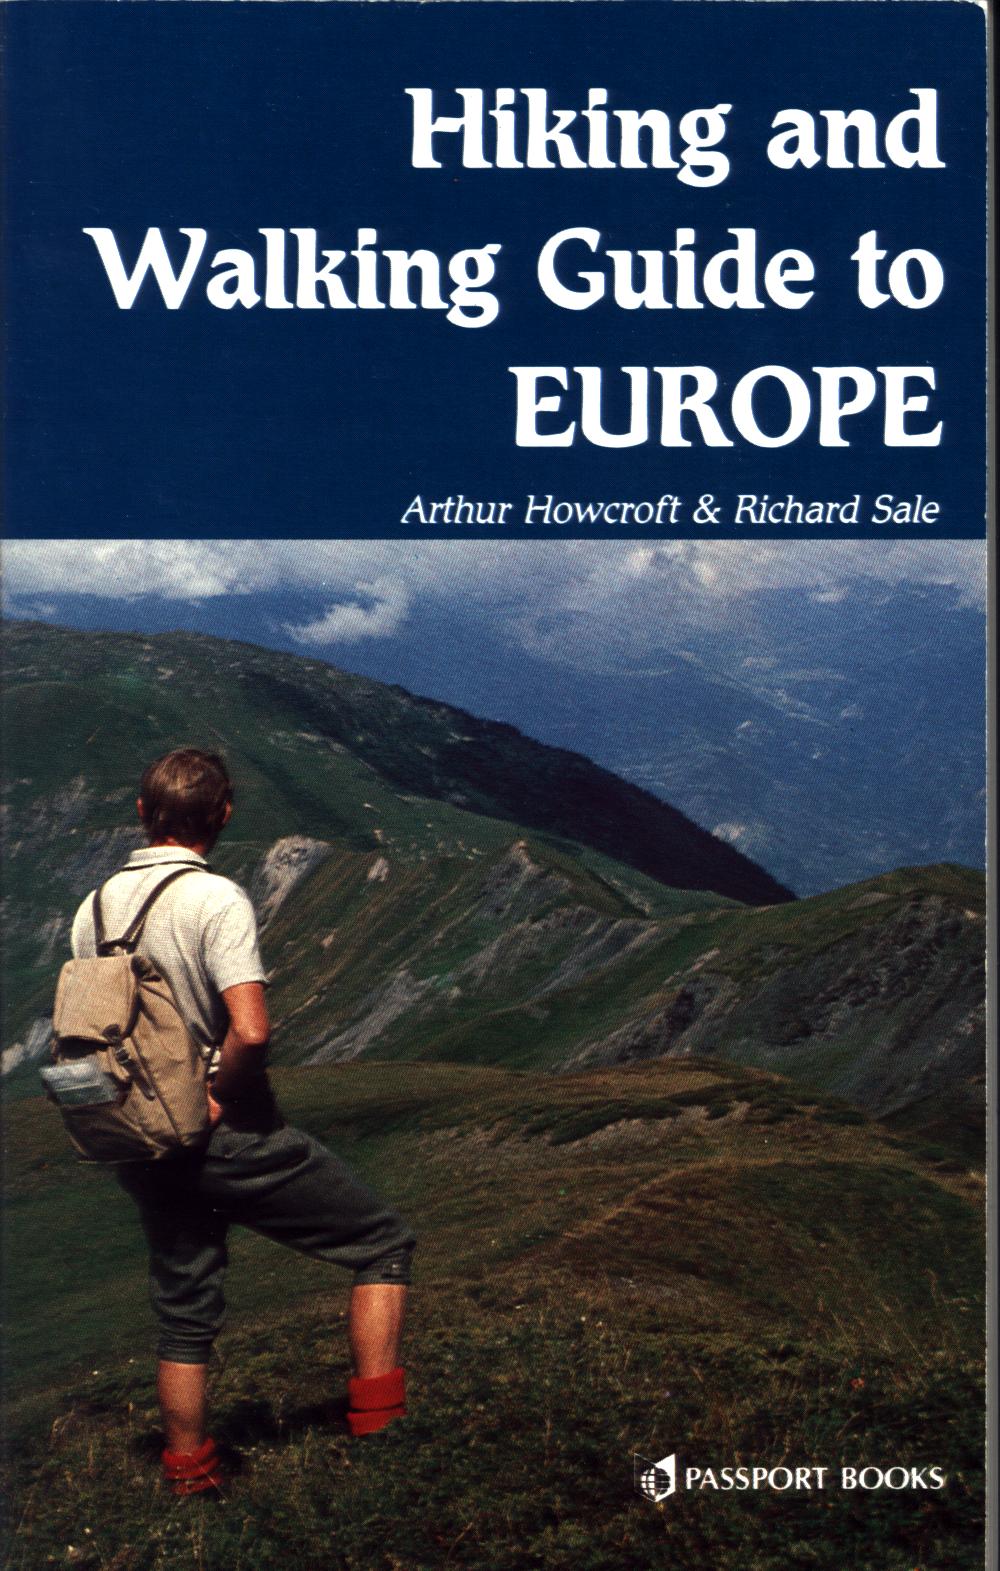 HIKING AND WALKING GUIDE TO EUROPE.